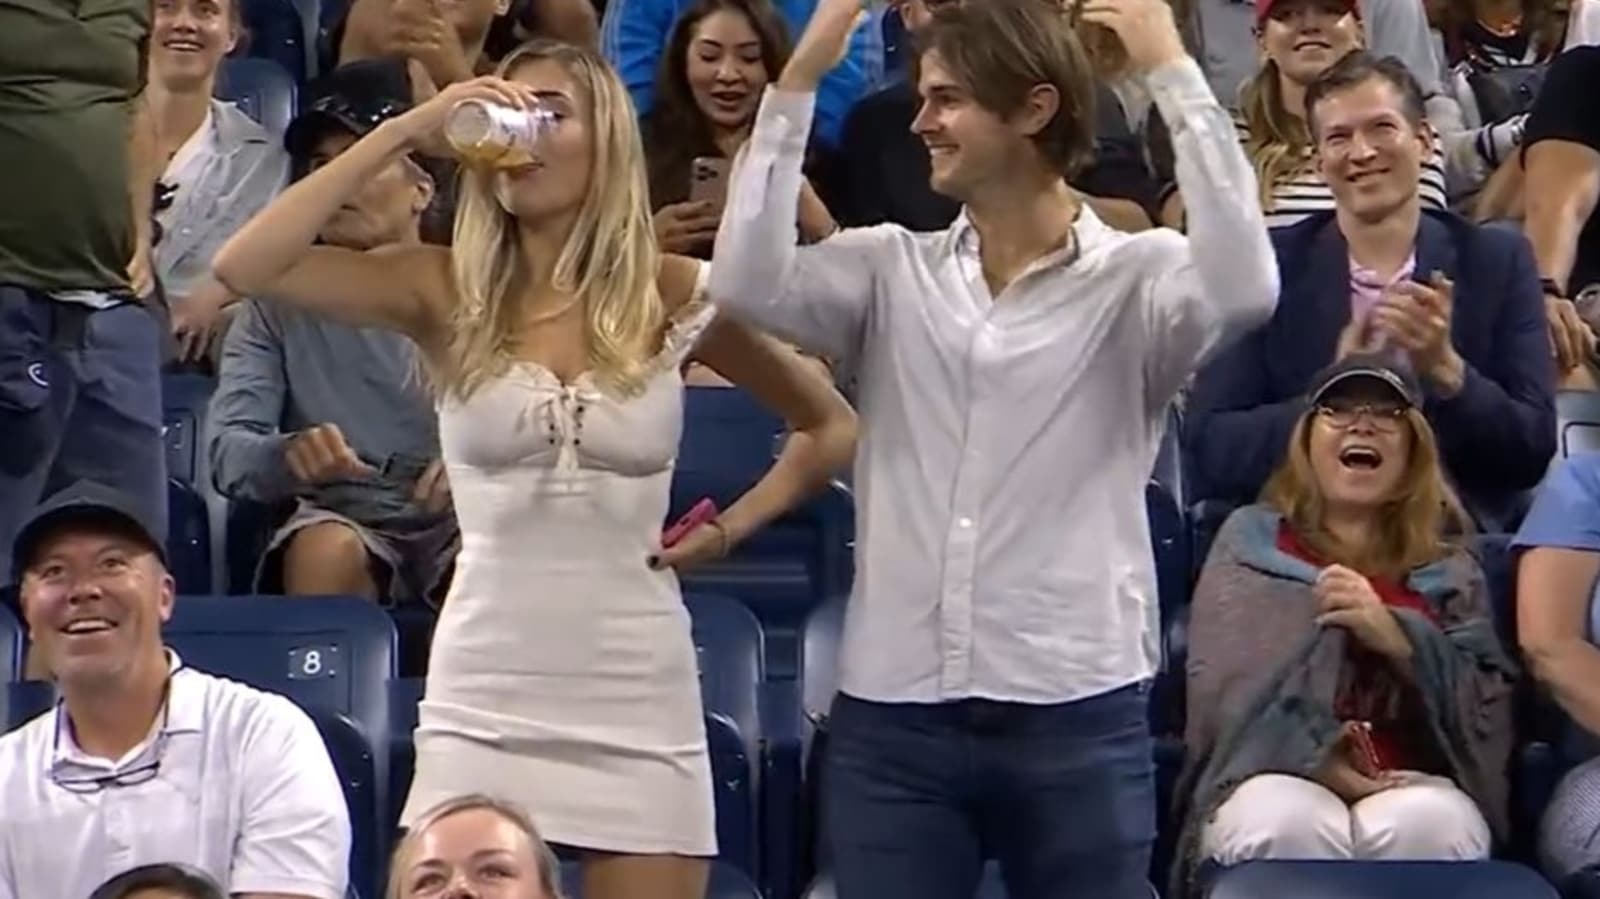 Watch US Open Beer Girl returns, chugs while crowd cheers in epic